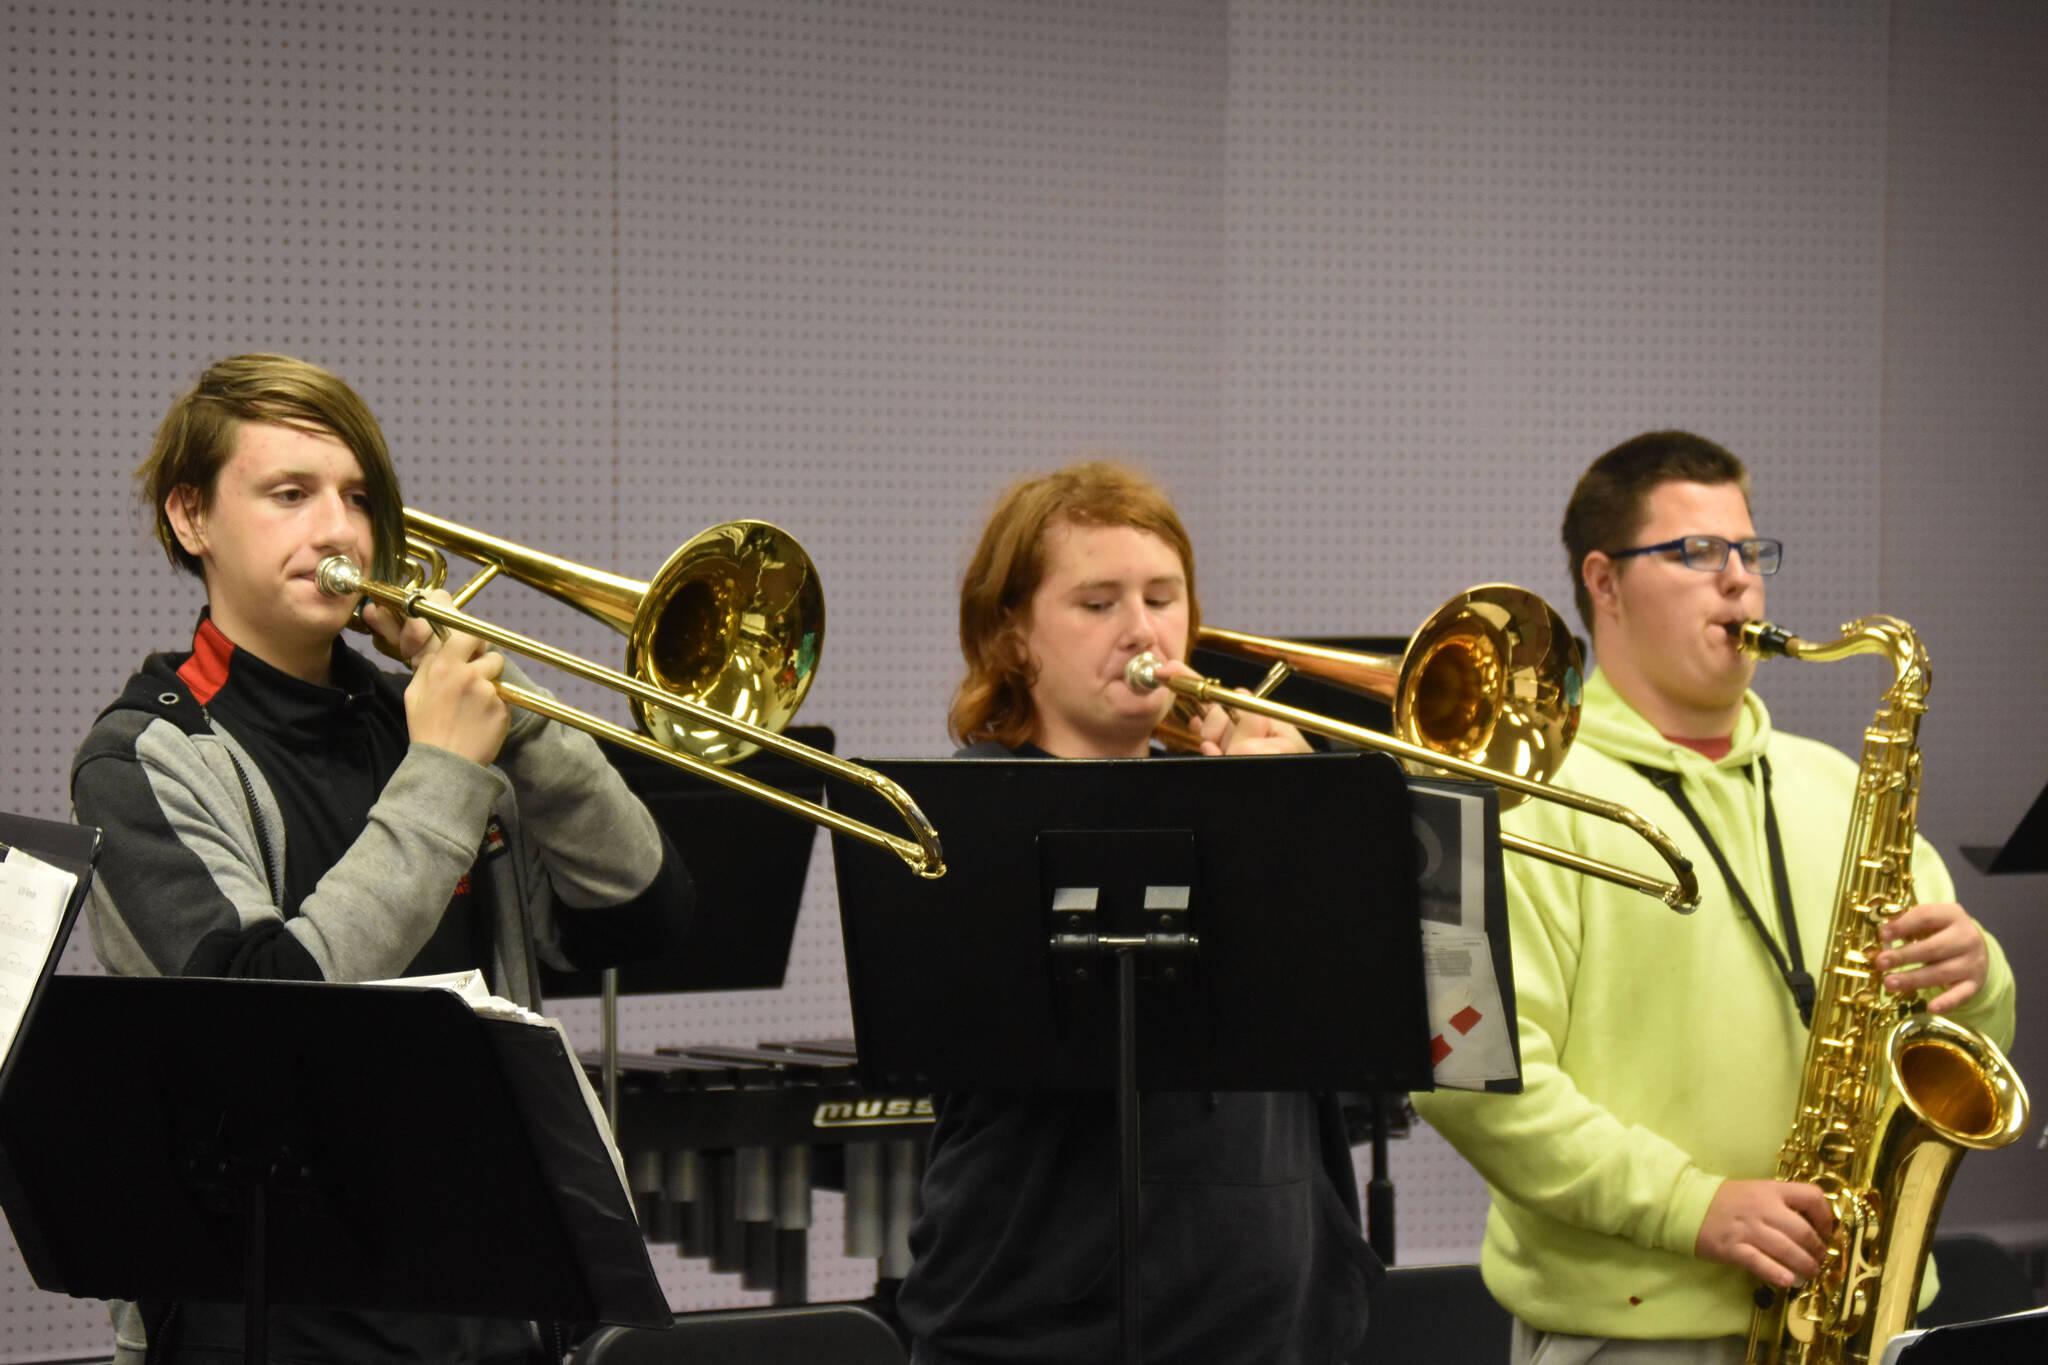 Two trombone players and a saxophone perform during a KCHS Marching Band practice on Aug. 18, 2022, in Kenai, Alaska. (Jake Dye/Peninsula Clarion)